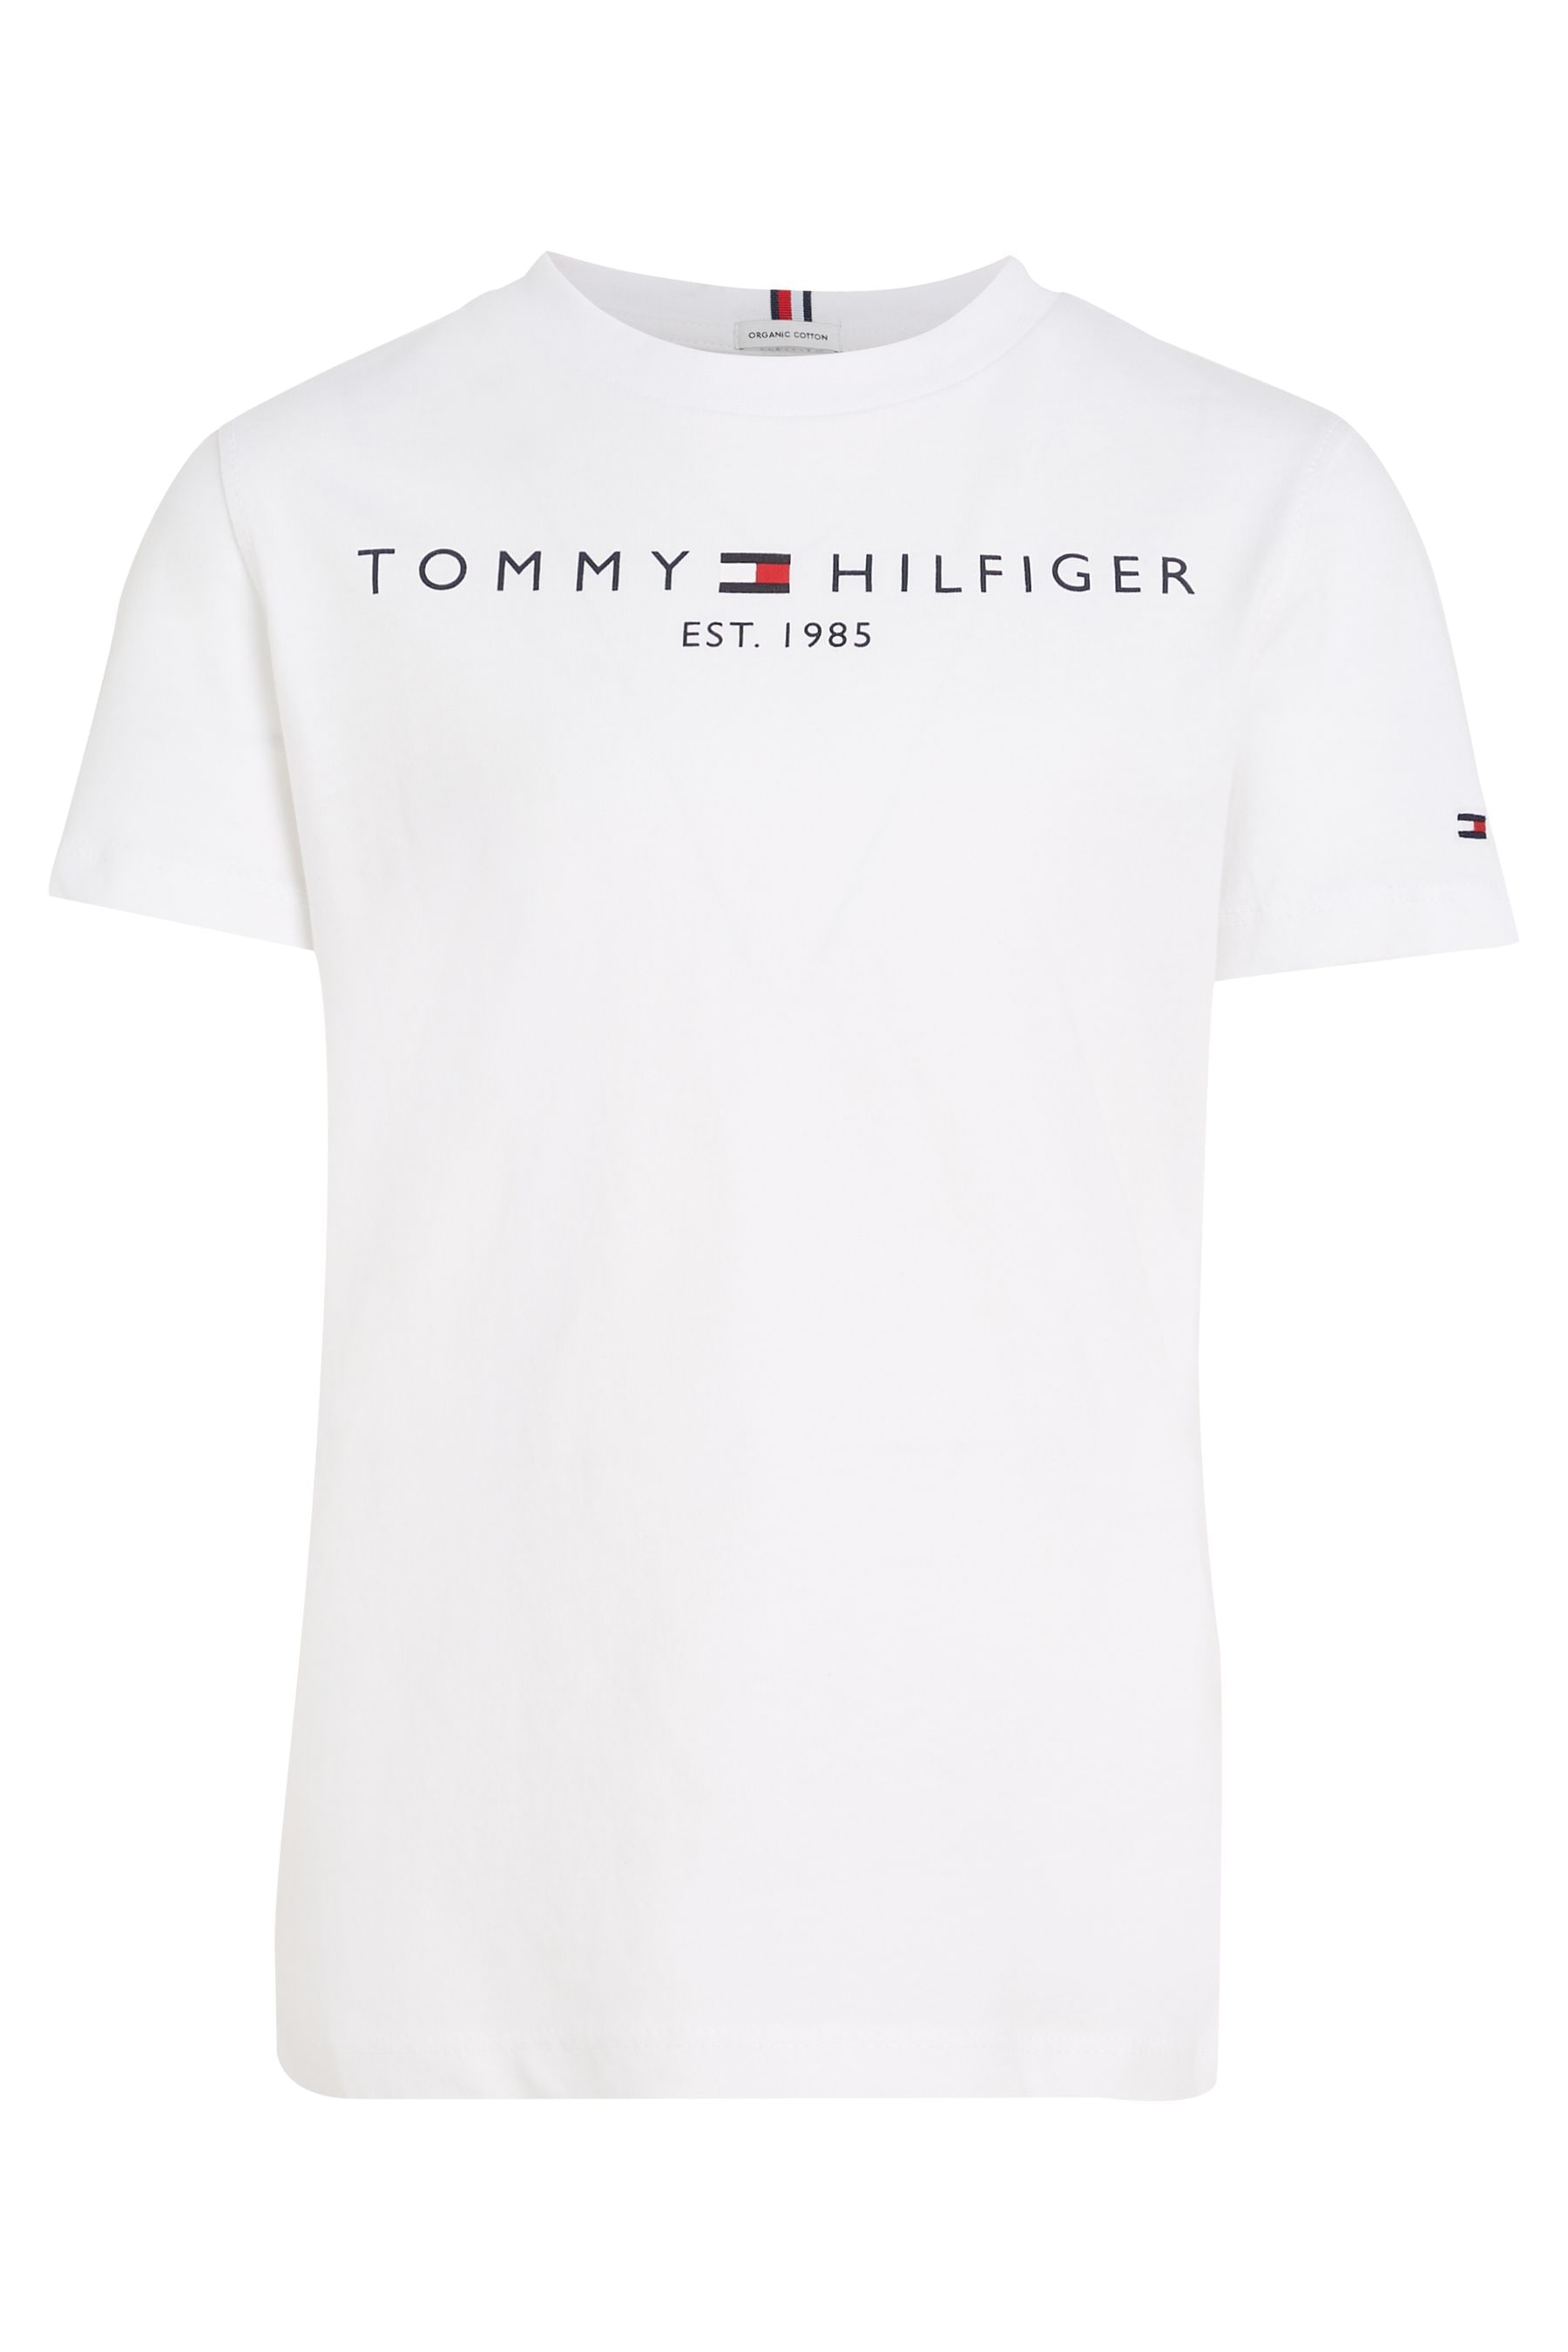 Buy Tommy Hilfiger Essential T-Shirt from the Next UK online shop